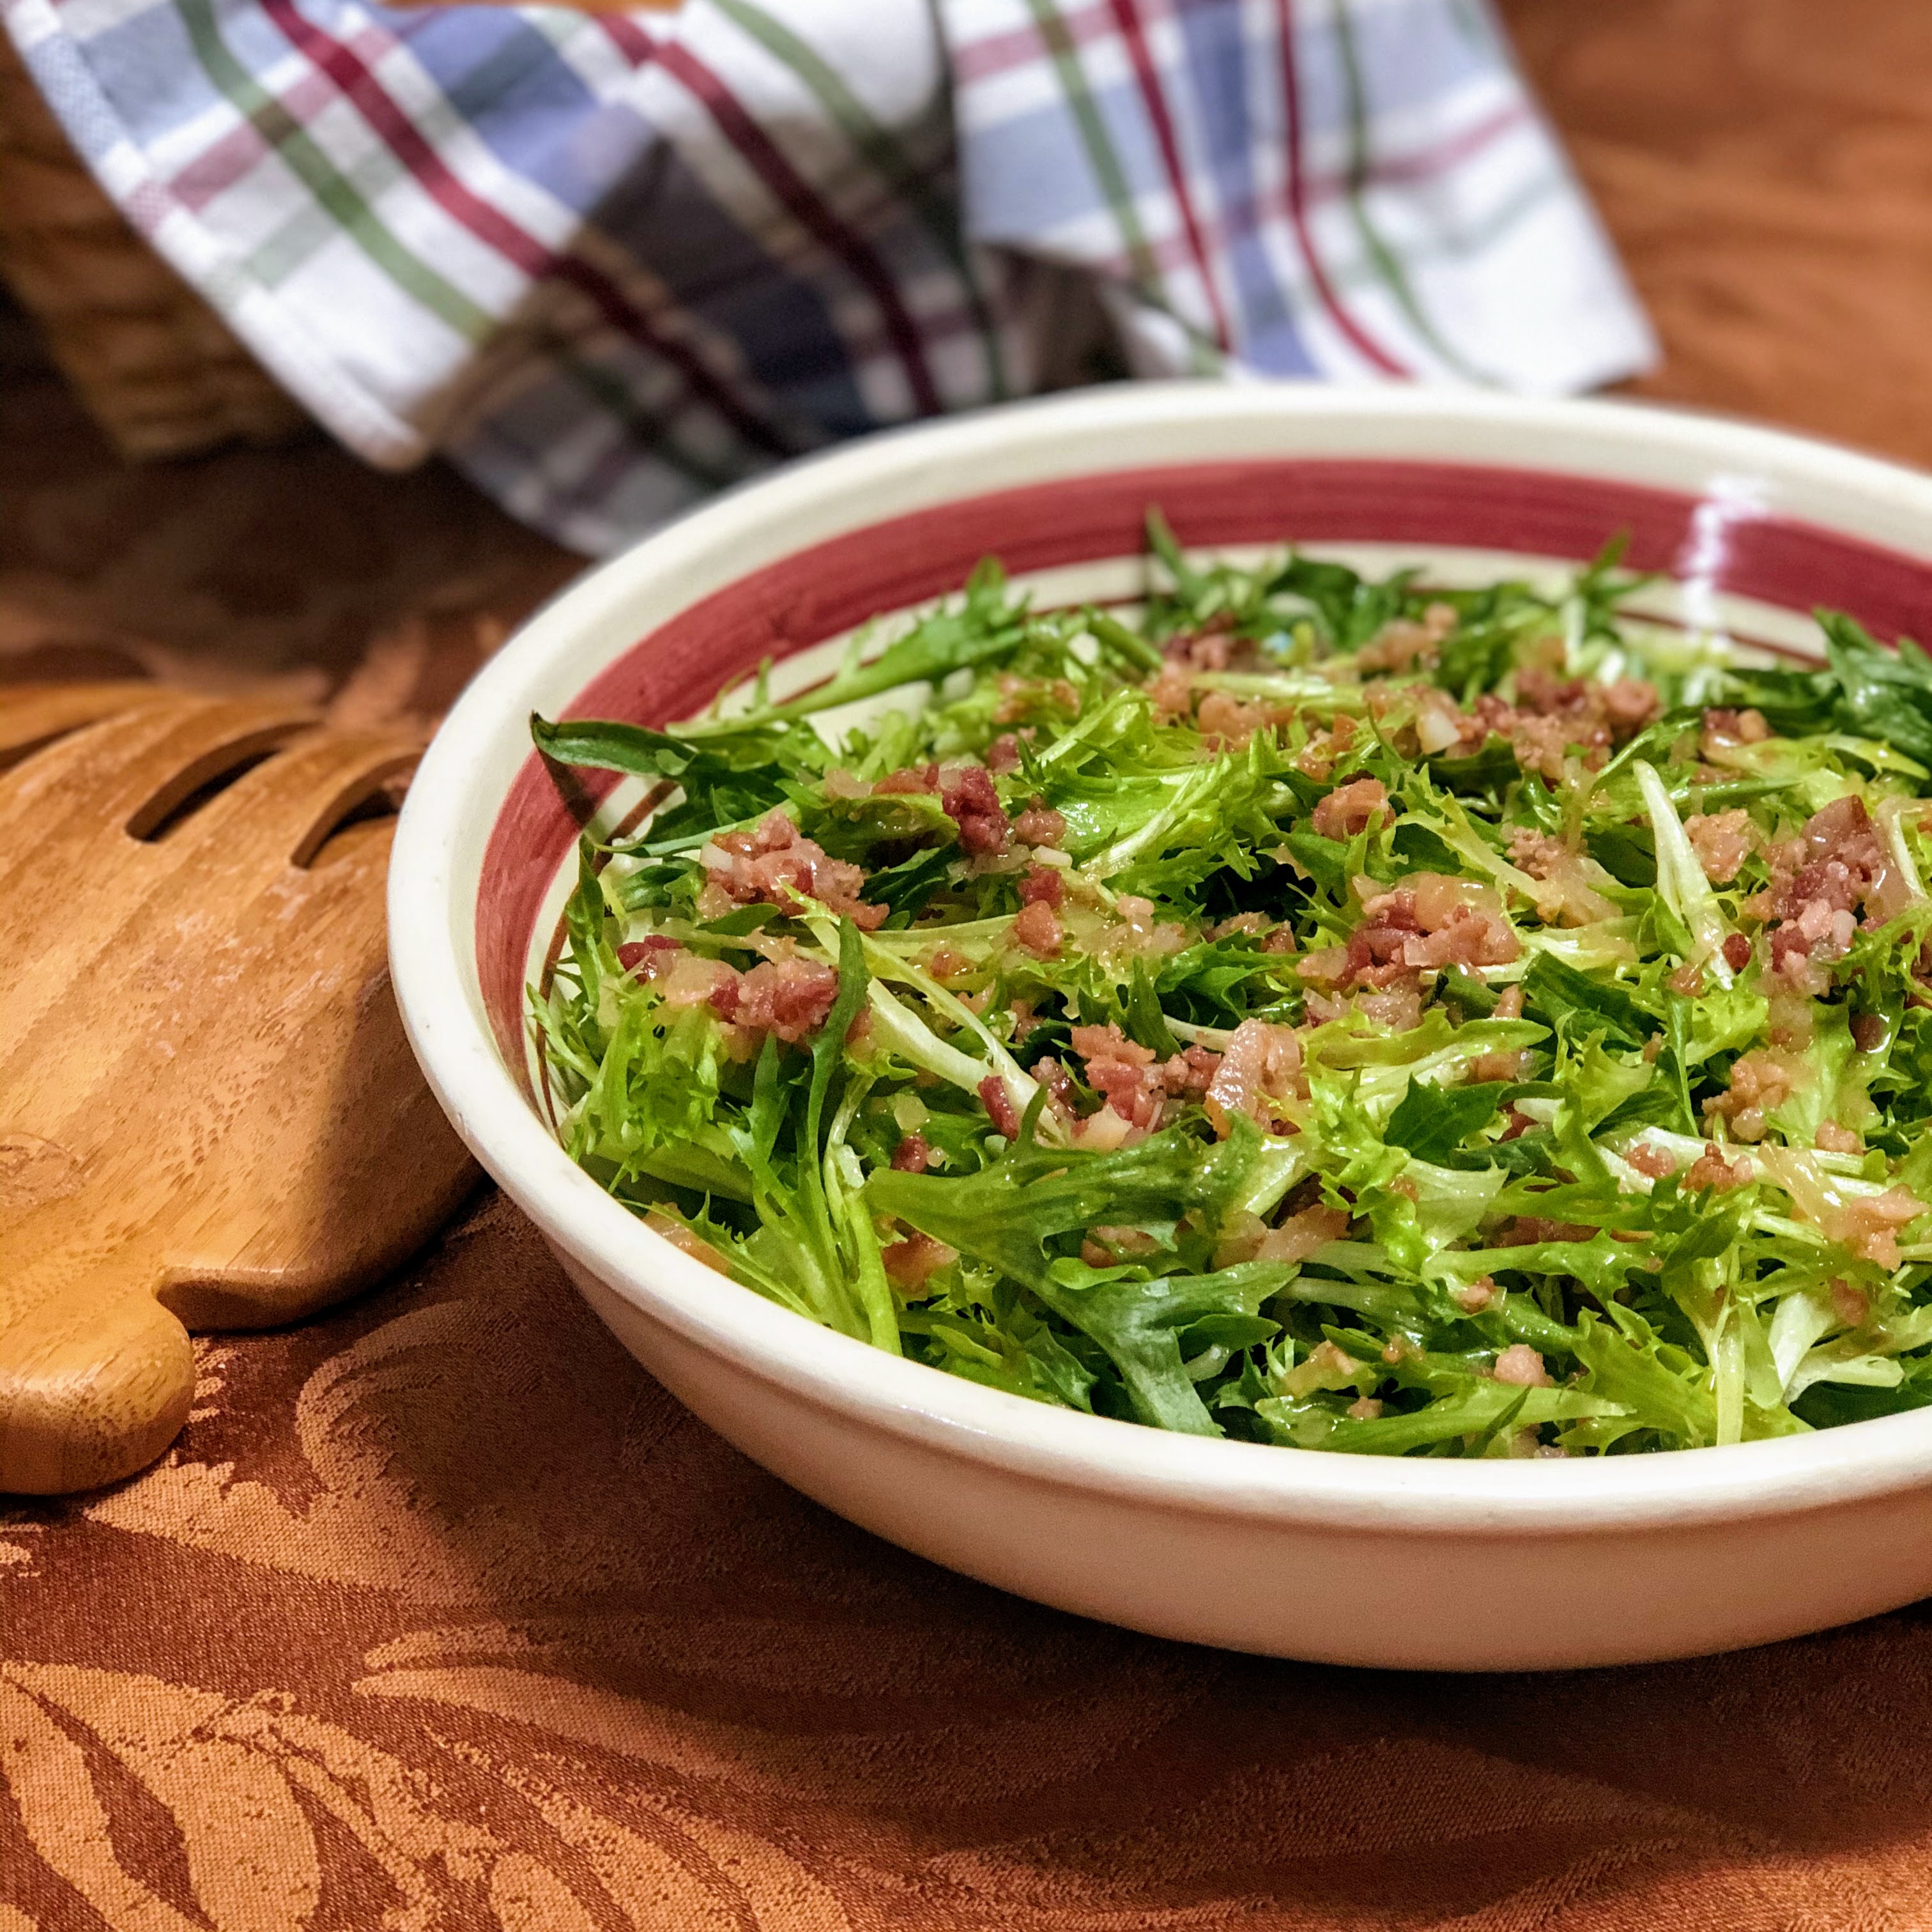 Frisee Salad with Hot Bacon Dressing 